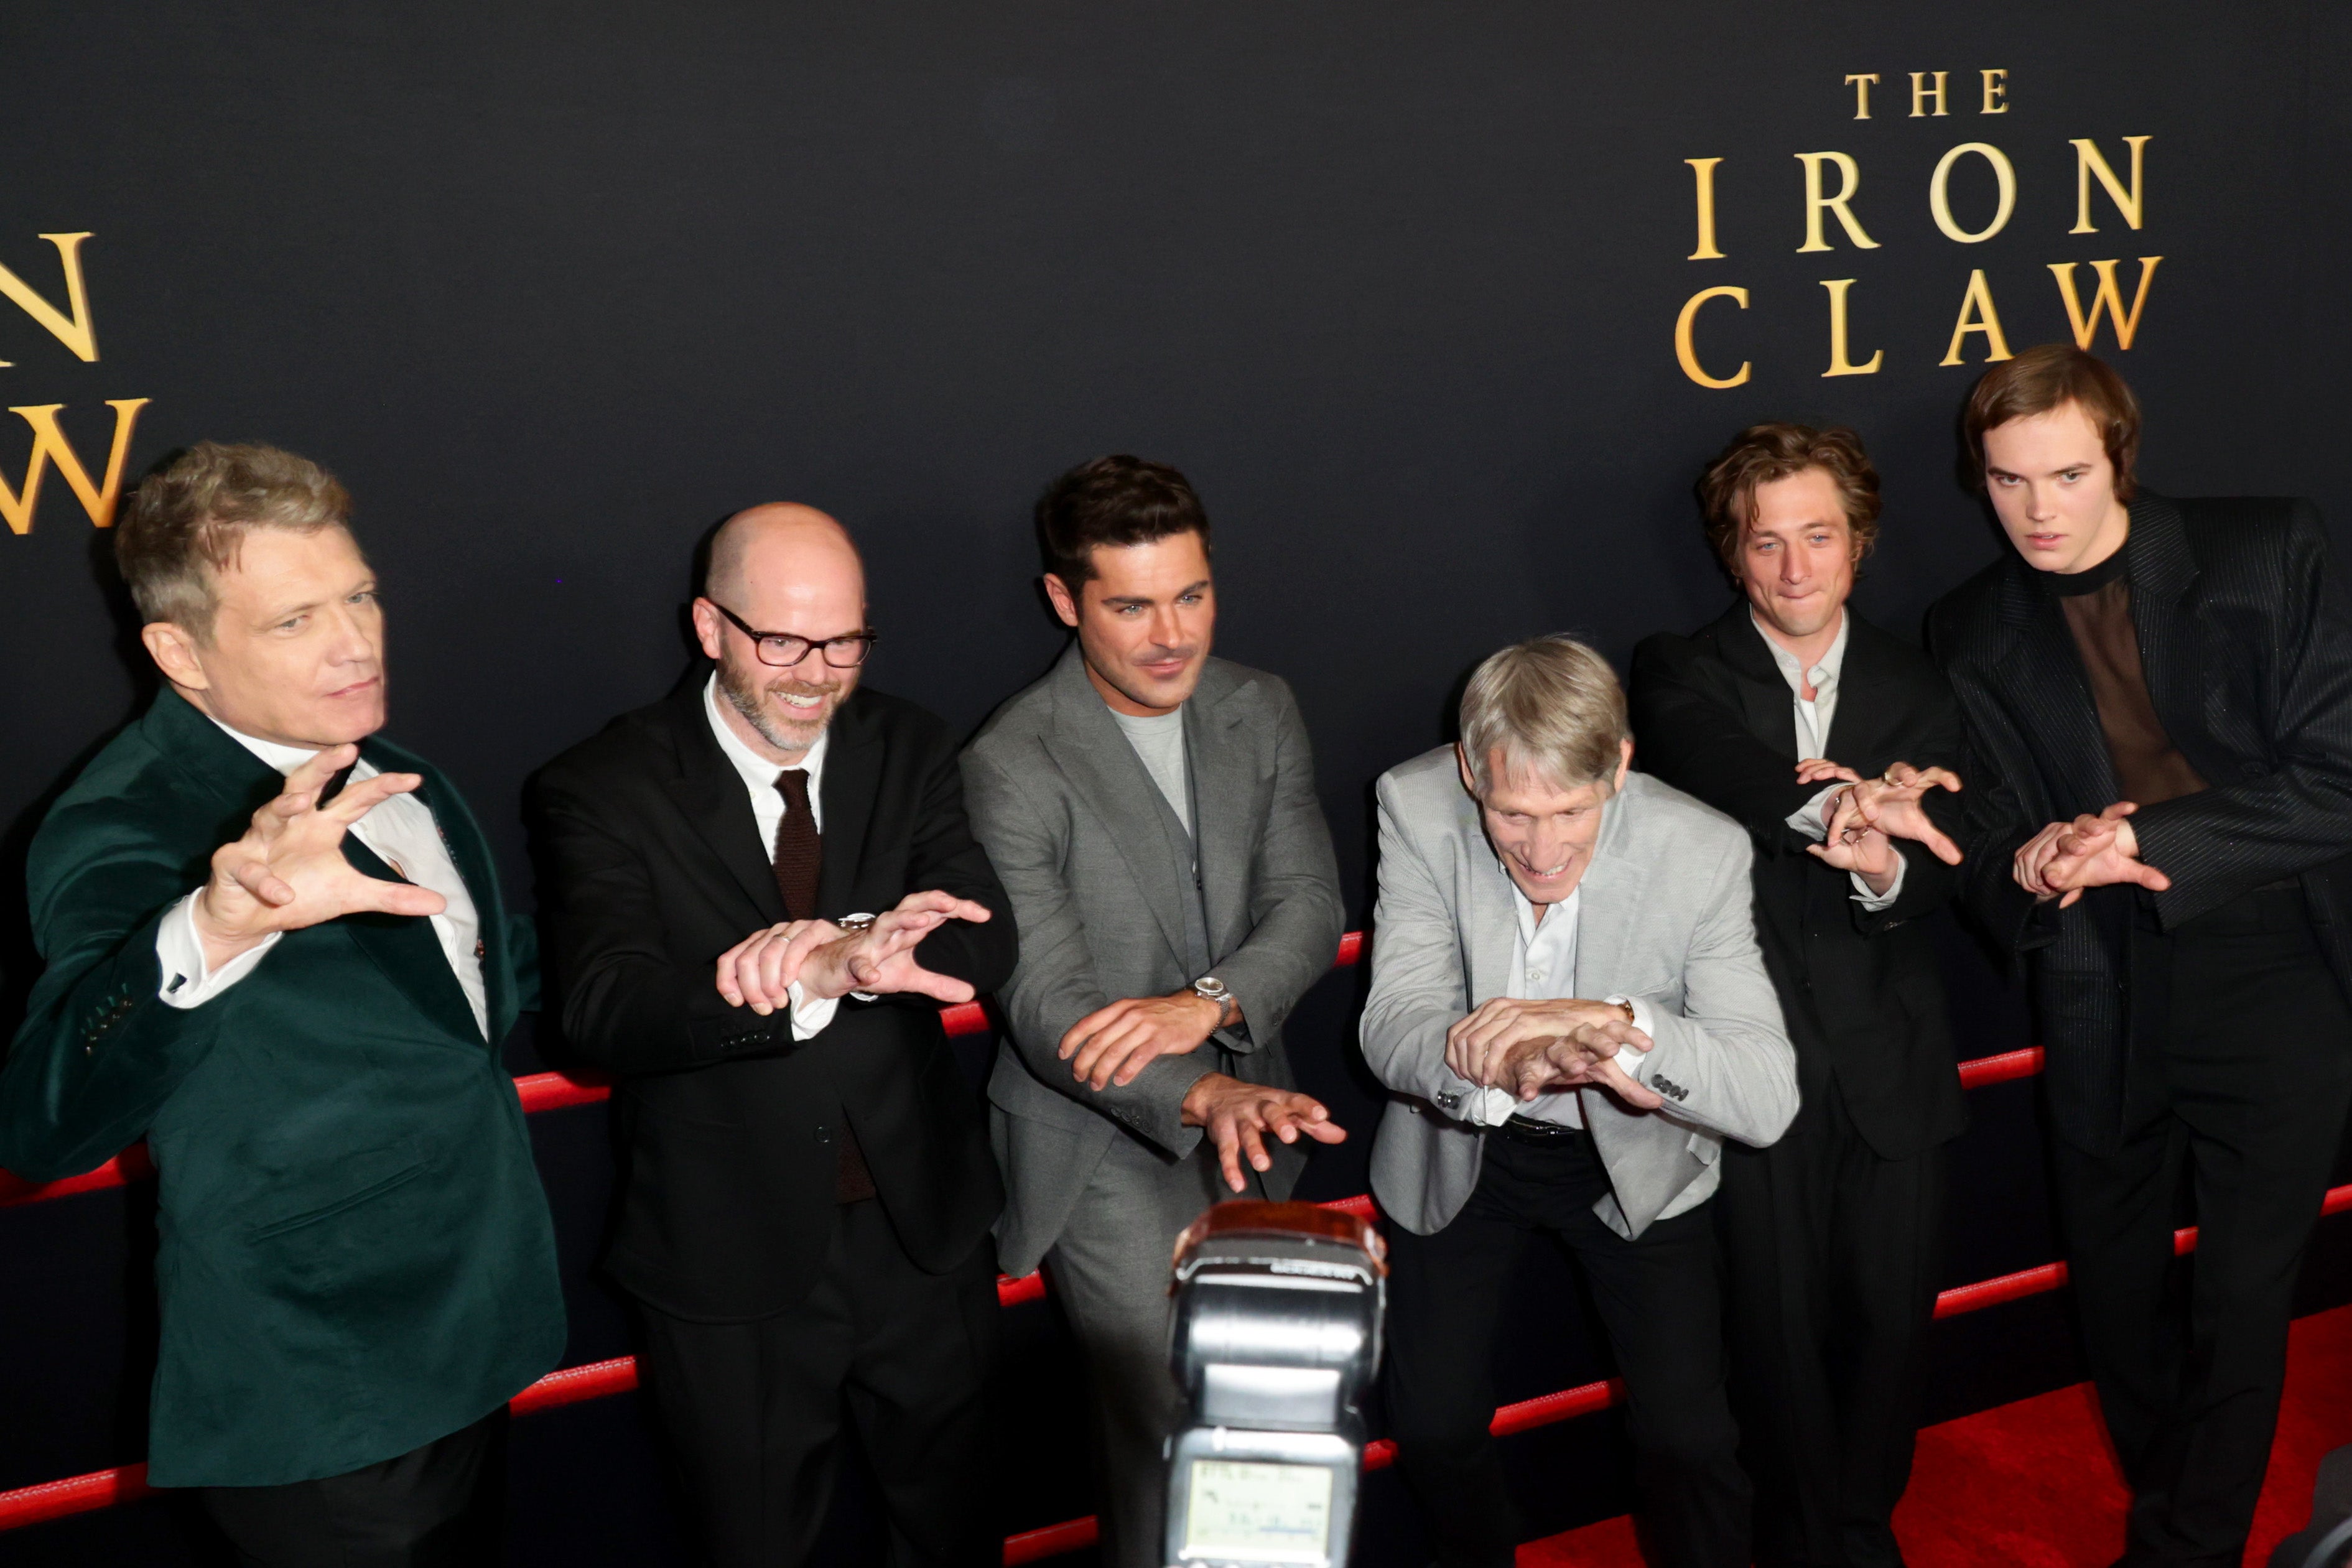 Holt McCallany, Sean Durkin, Zac Efron, Kevin Von Erich, Jeremy Allen White, and Stanley Simons at the LA premiere of ‘The Iron Claw’ on 11 December 2023